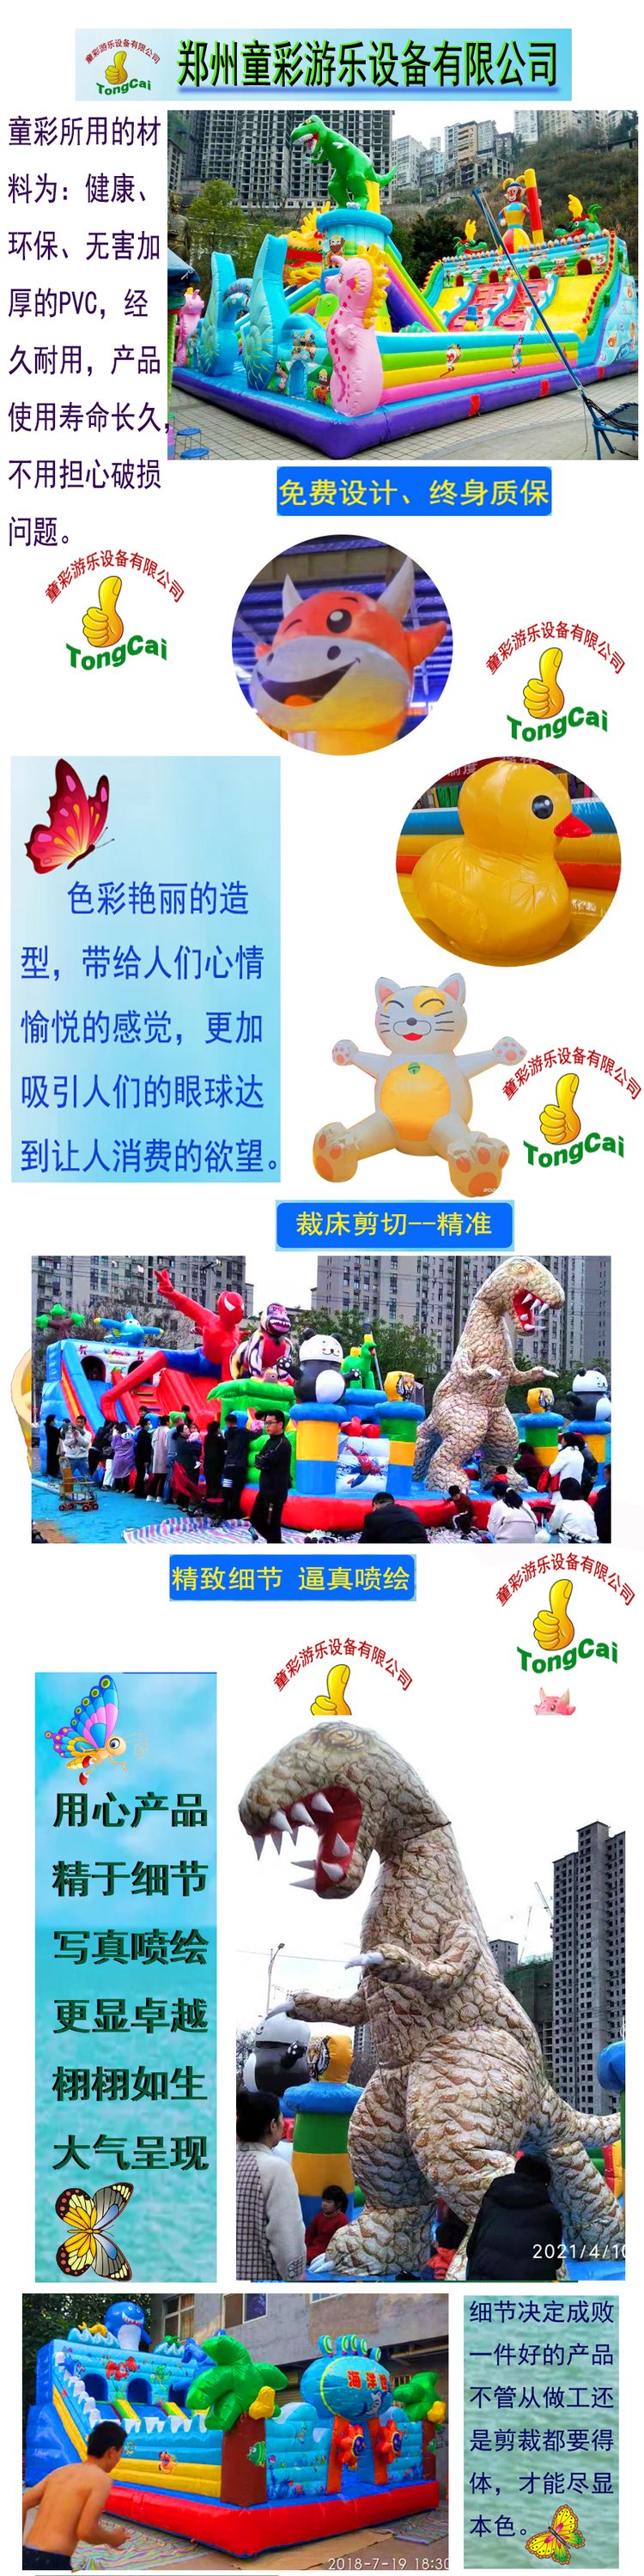 Tongcai Inflatable Shark Slide Thickened PVC Outdoor Inflatable Castle Fast Money Making Amusement Equipment